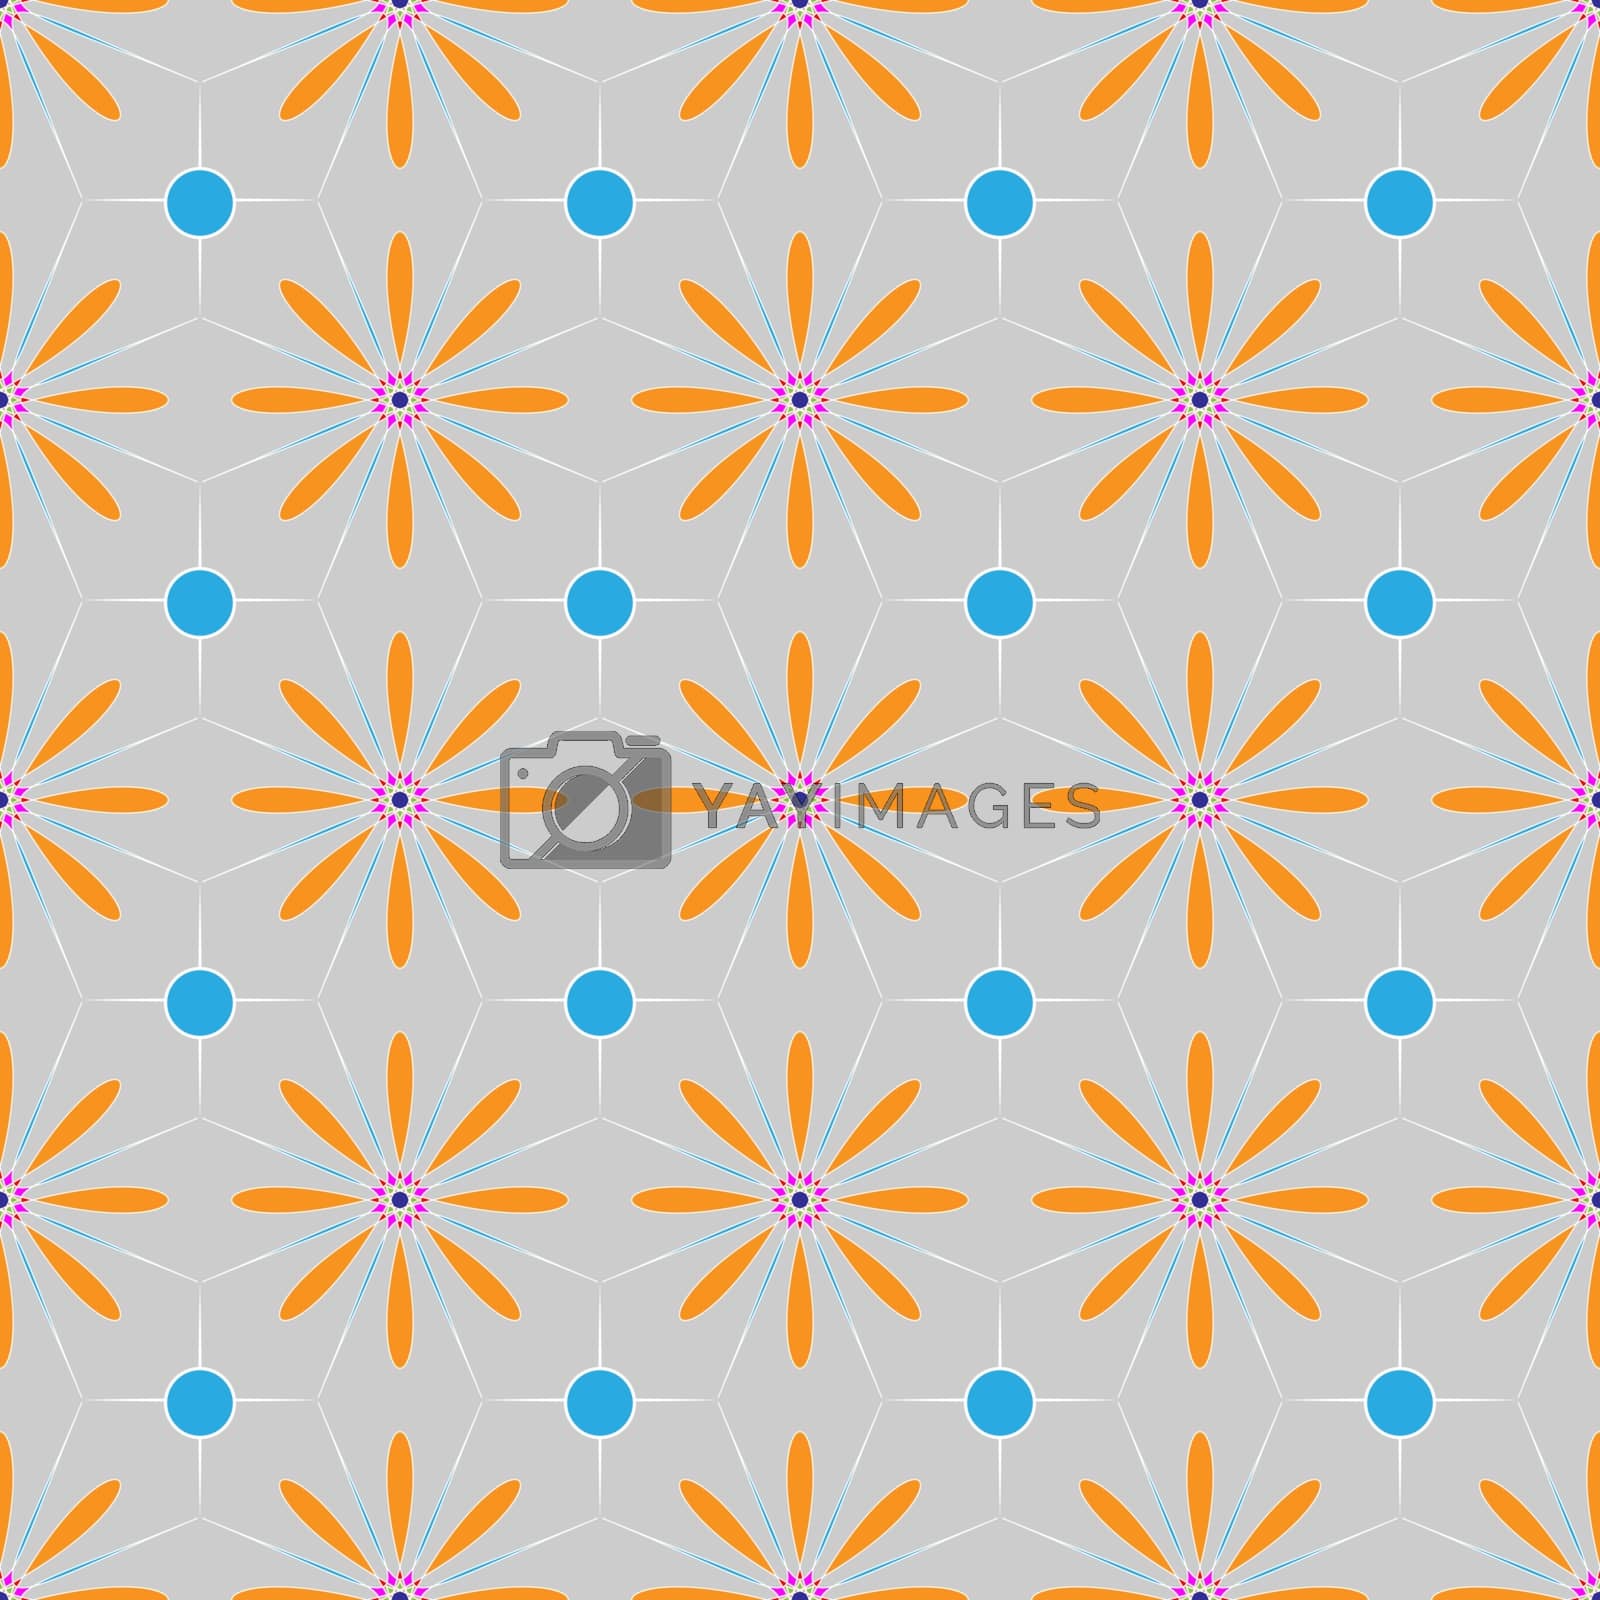 Royalty free image of Multicolored Floral Ethnic geometric patterns colorful design for background or wallpaper. Abstract print. by Musjaka